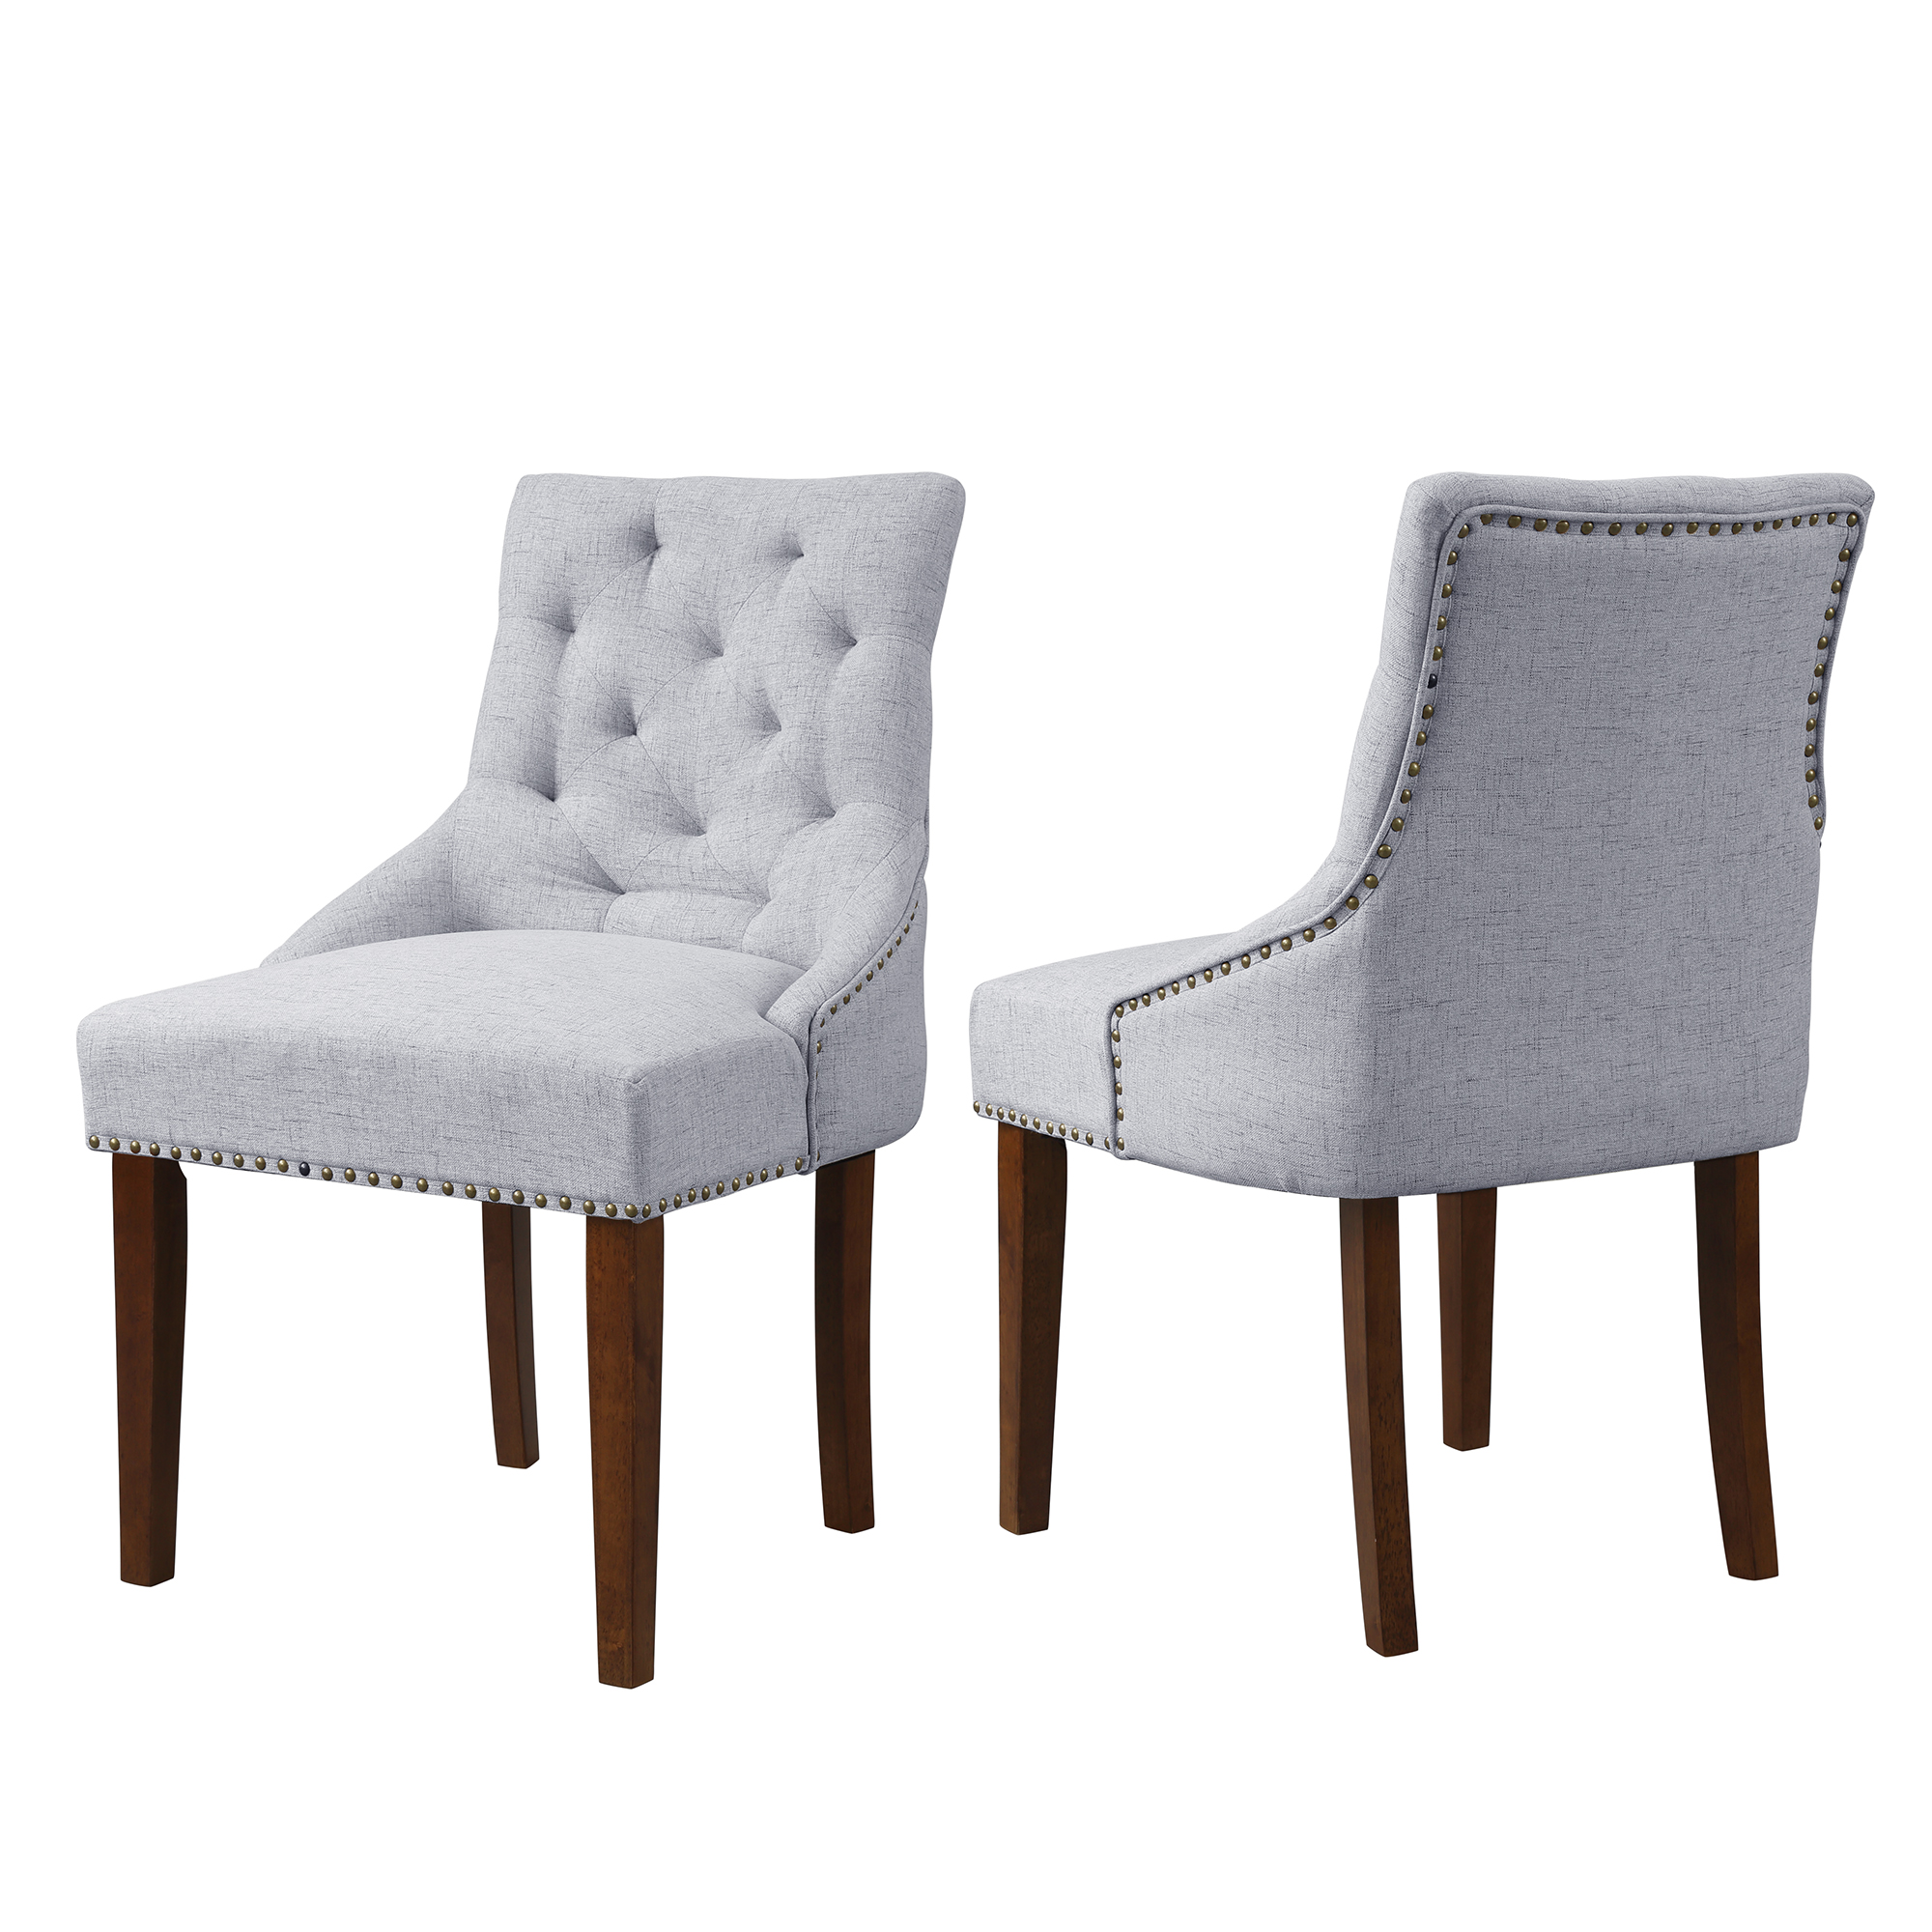 Dining Chair with Armrest, Nailhead Trim, Linen Upholstery Set of 2 (Gray)-Boyel Living